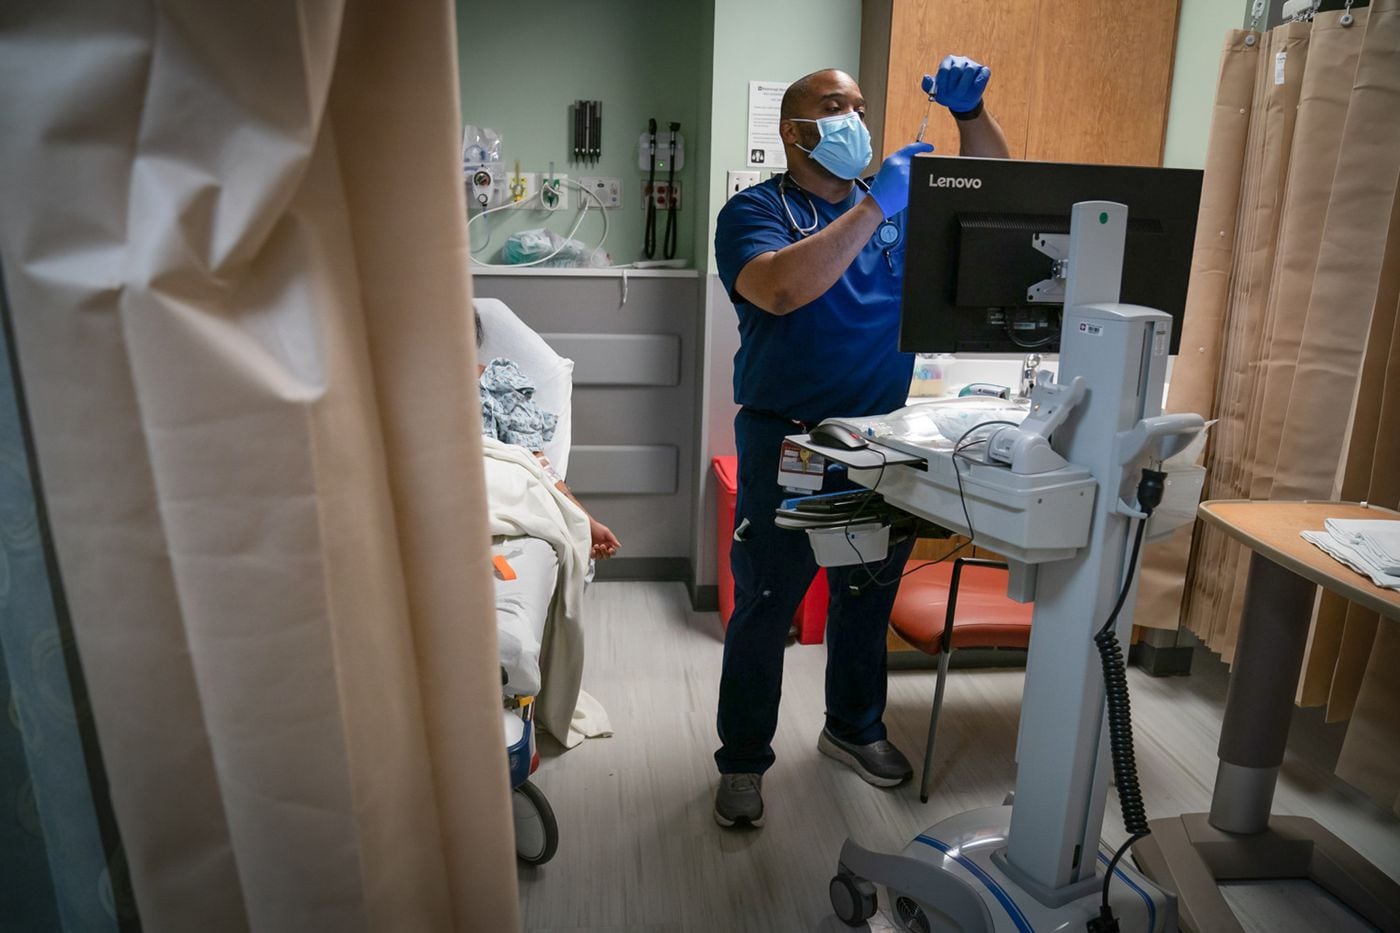 ER nurse Micah Maxton treats a patient with a severe migraine at Roxborough Memorial Hospital in Philadelphia last month. Maxton, who grew up in North Philadelphia, lost an aunt, cousin and scores of friends and acquaintances to COVID-19.